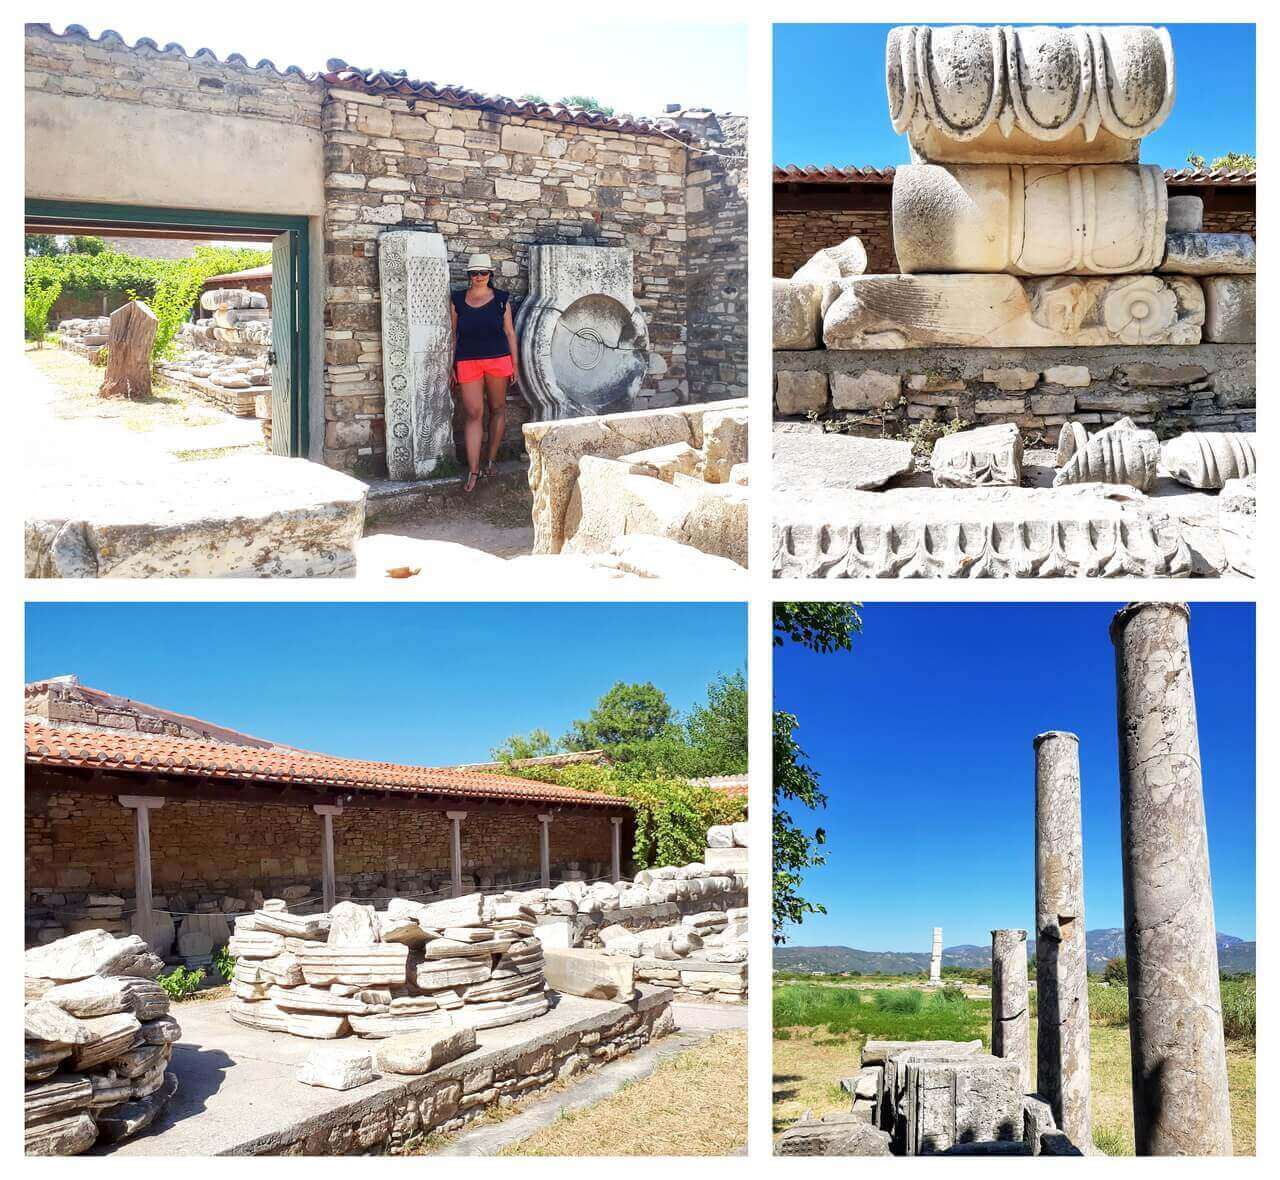 The ancient remains in Heraion sanctuary, Samos